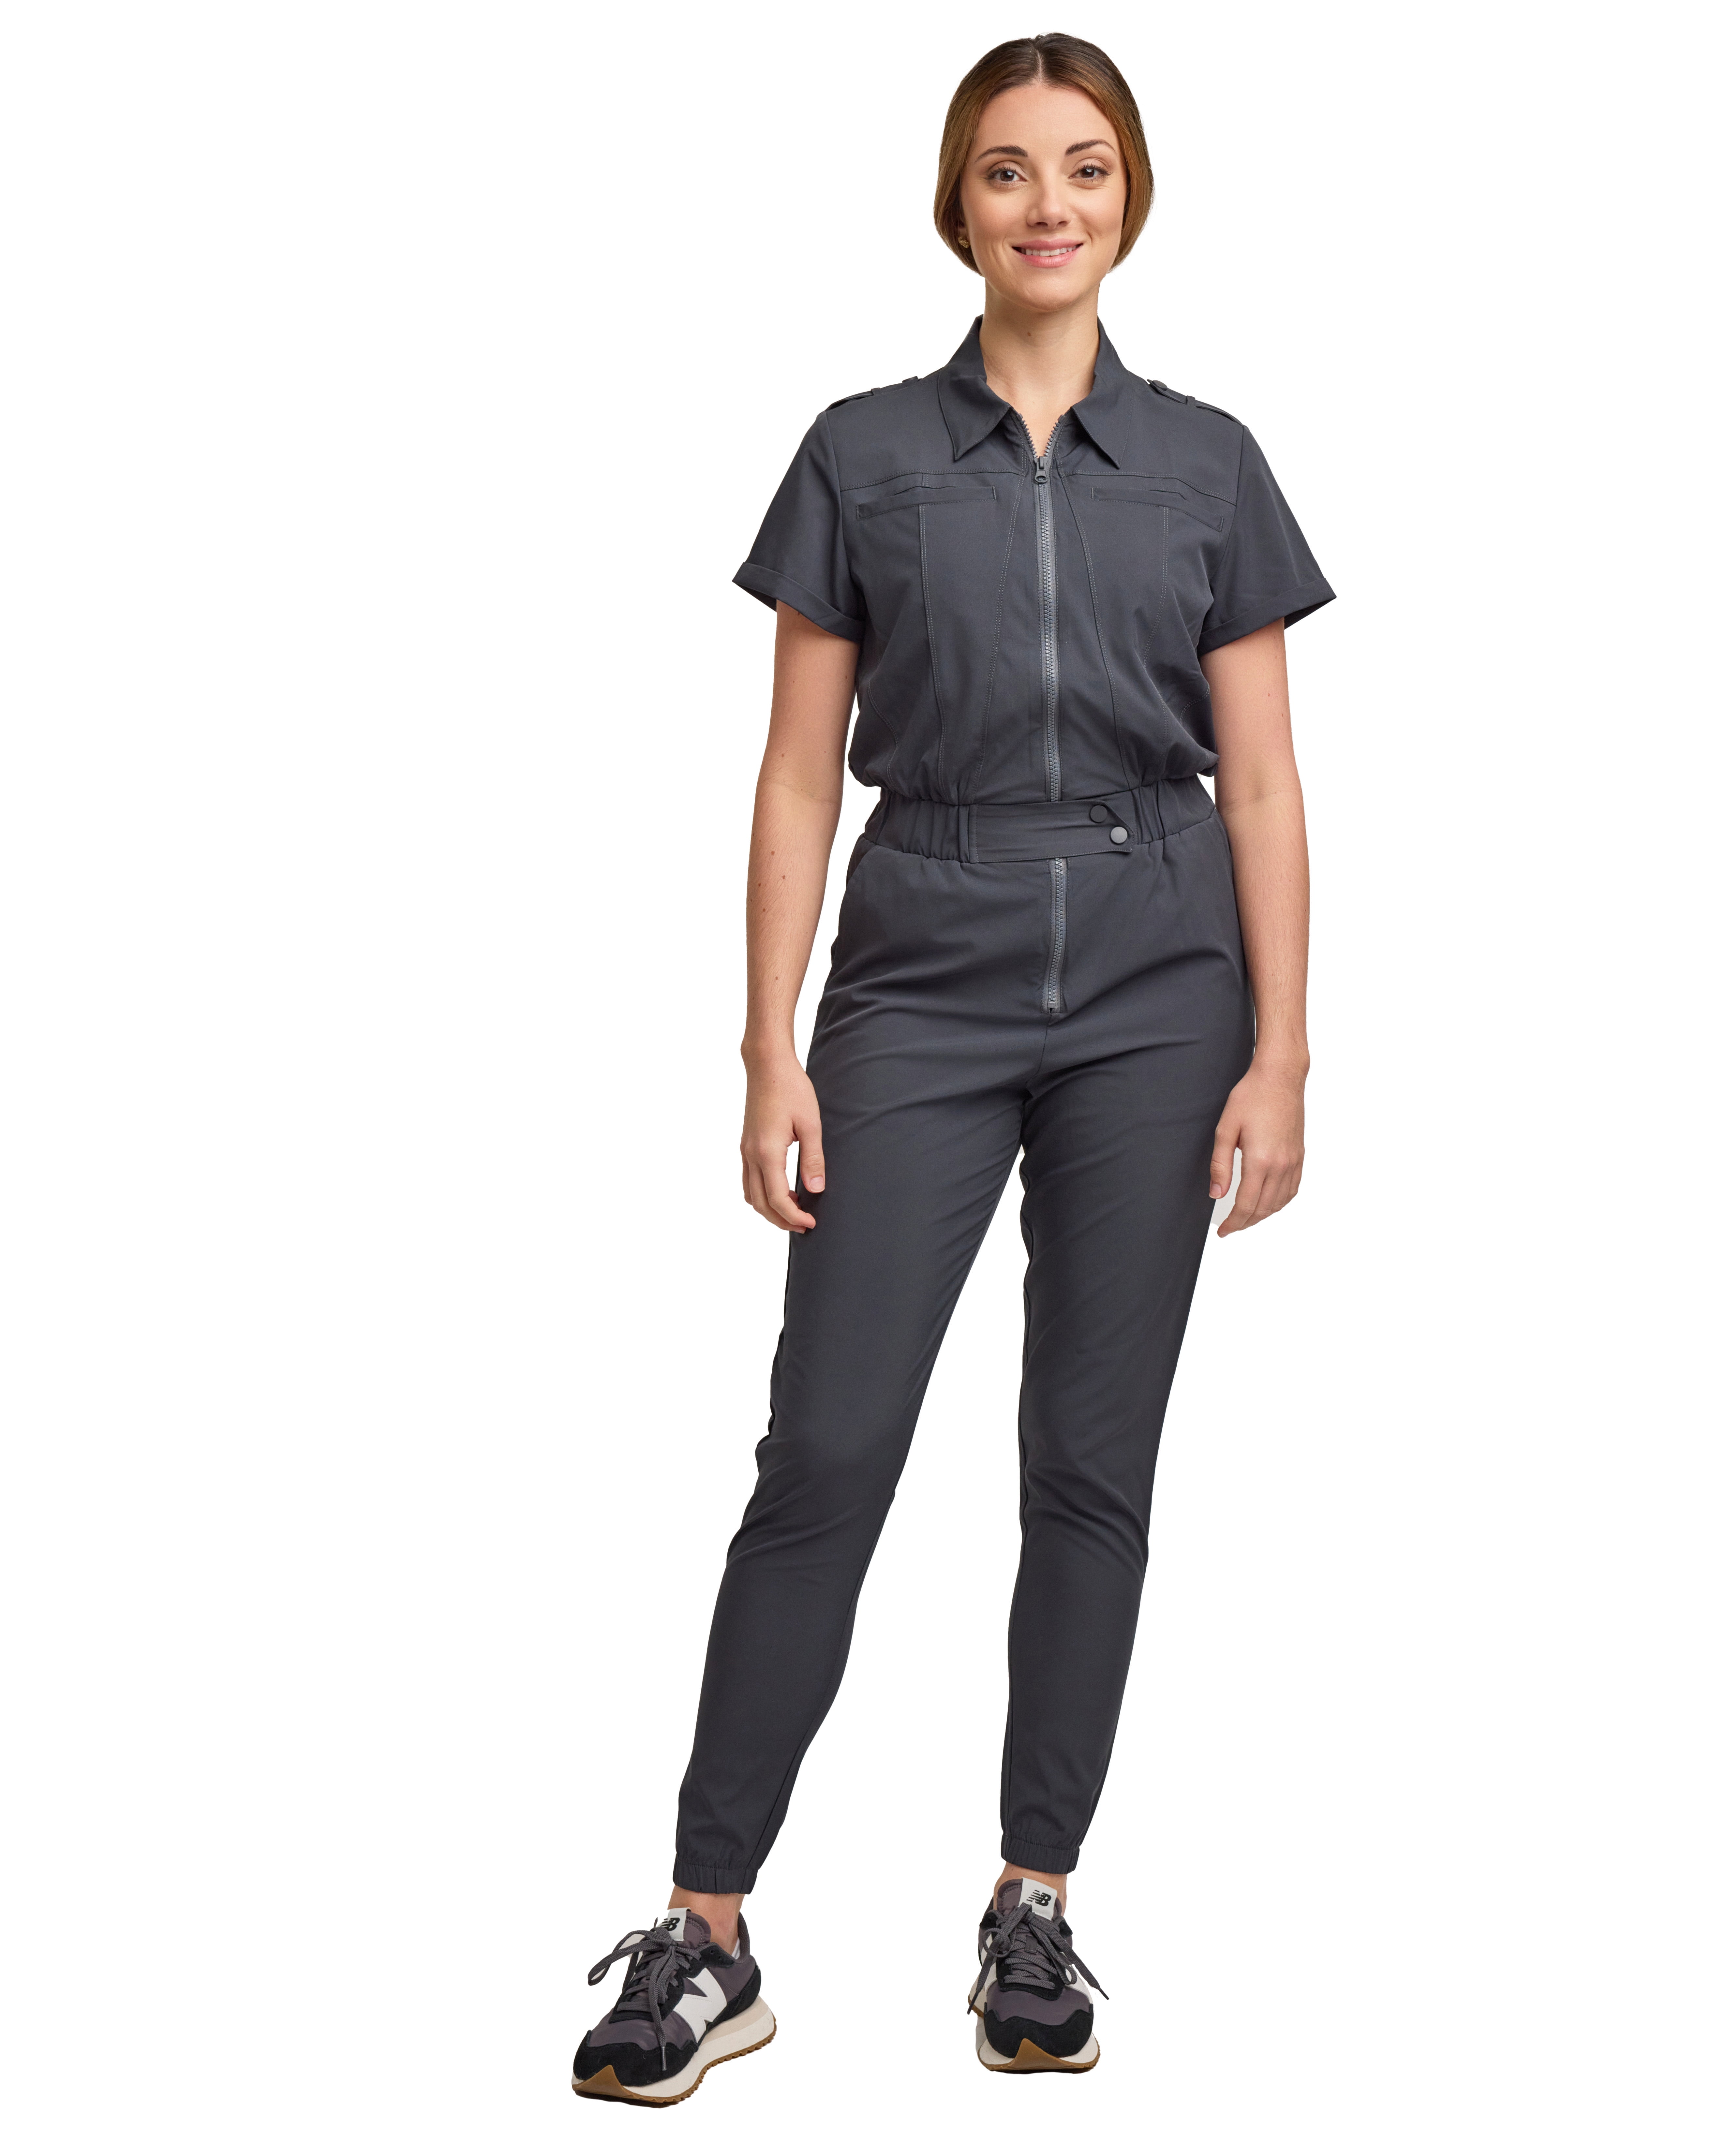 Green Town Scrubs for Women Scrub Jumpsuit - Jogger Pant, 6 pockets, Easy  Care Stretch Fabric Uniforms